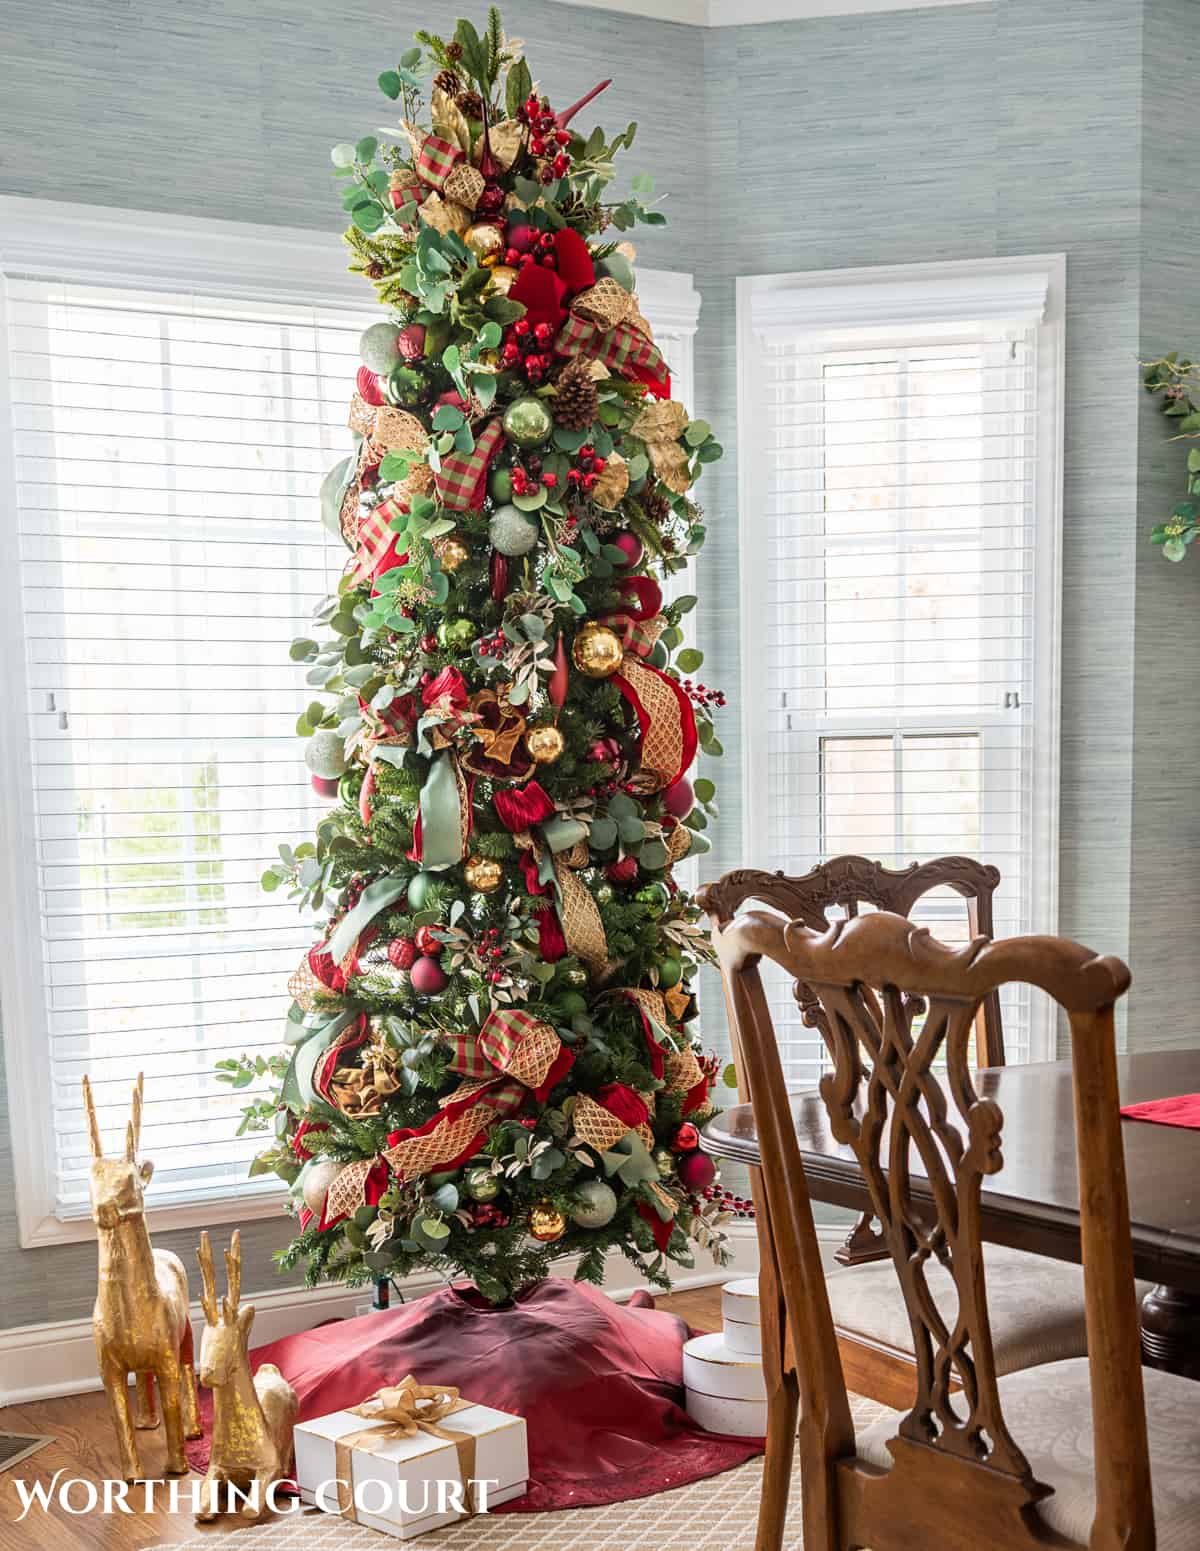 Slim Christmas tree with burgundy, green and gold decorations in a bay window.